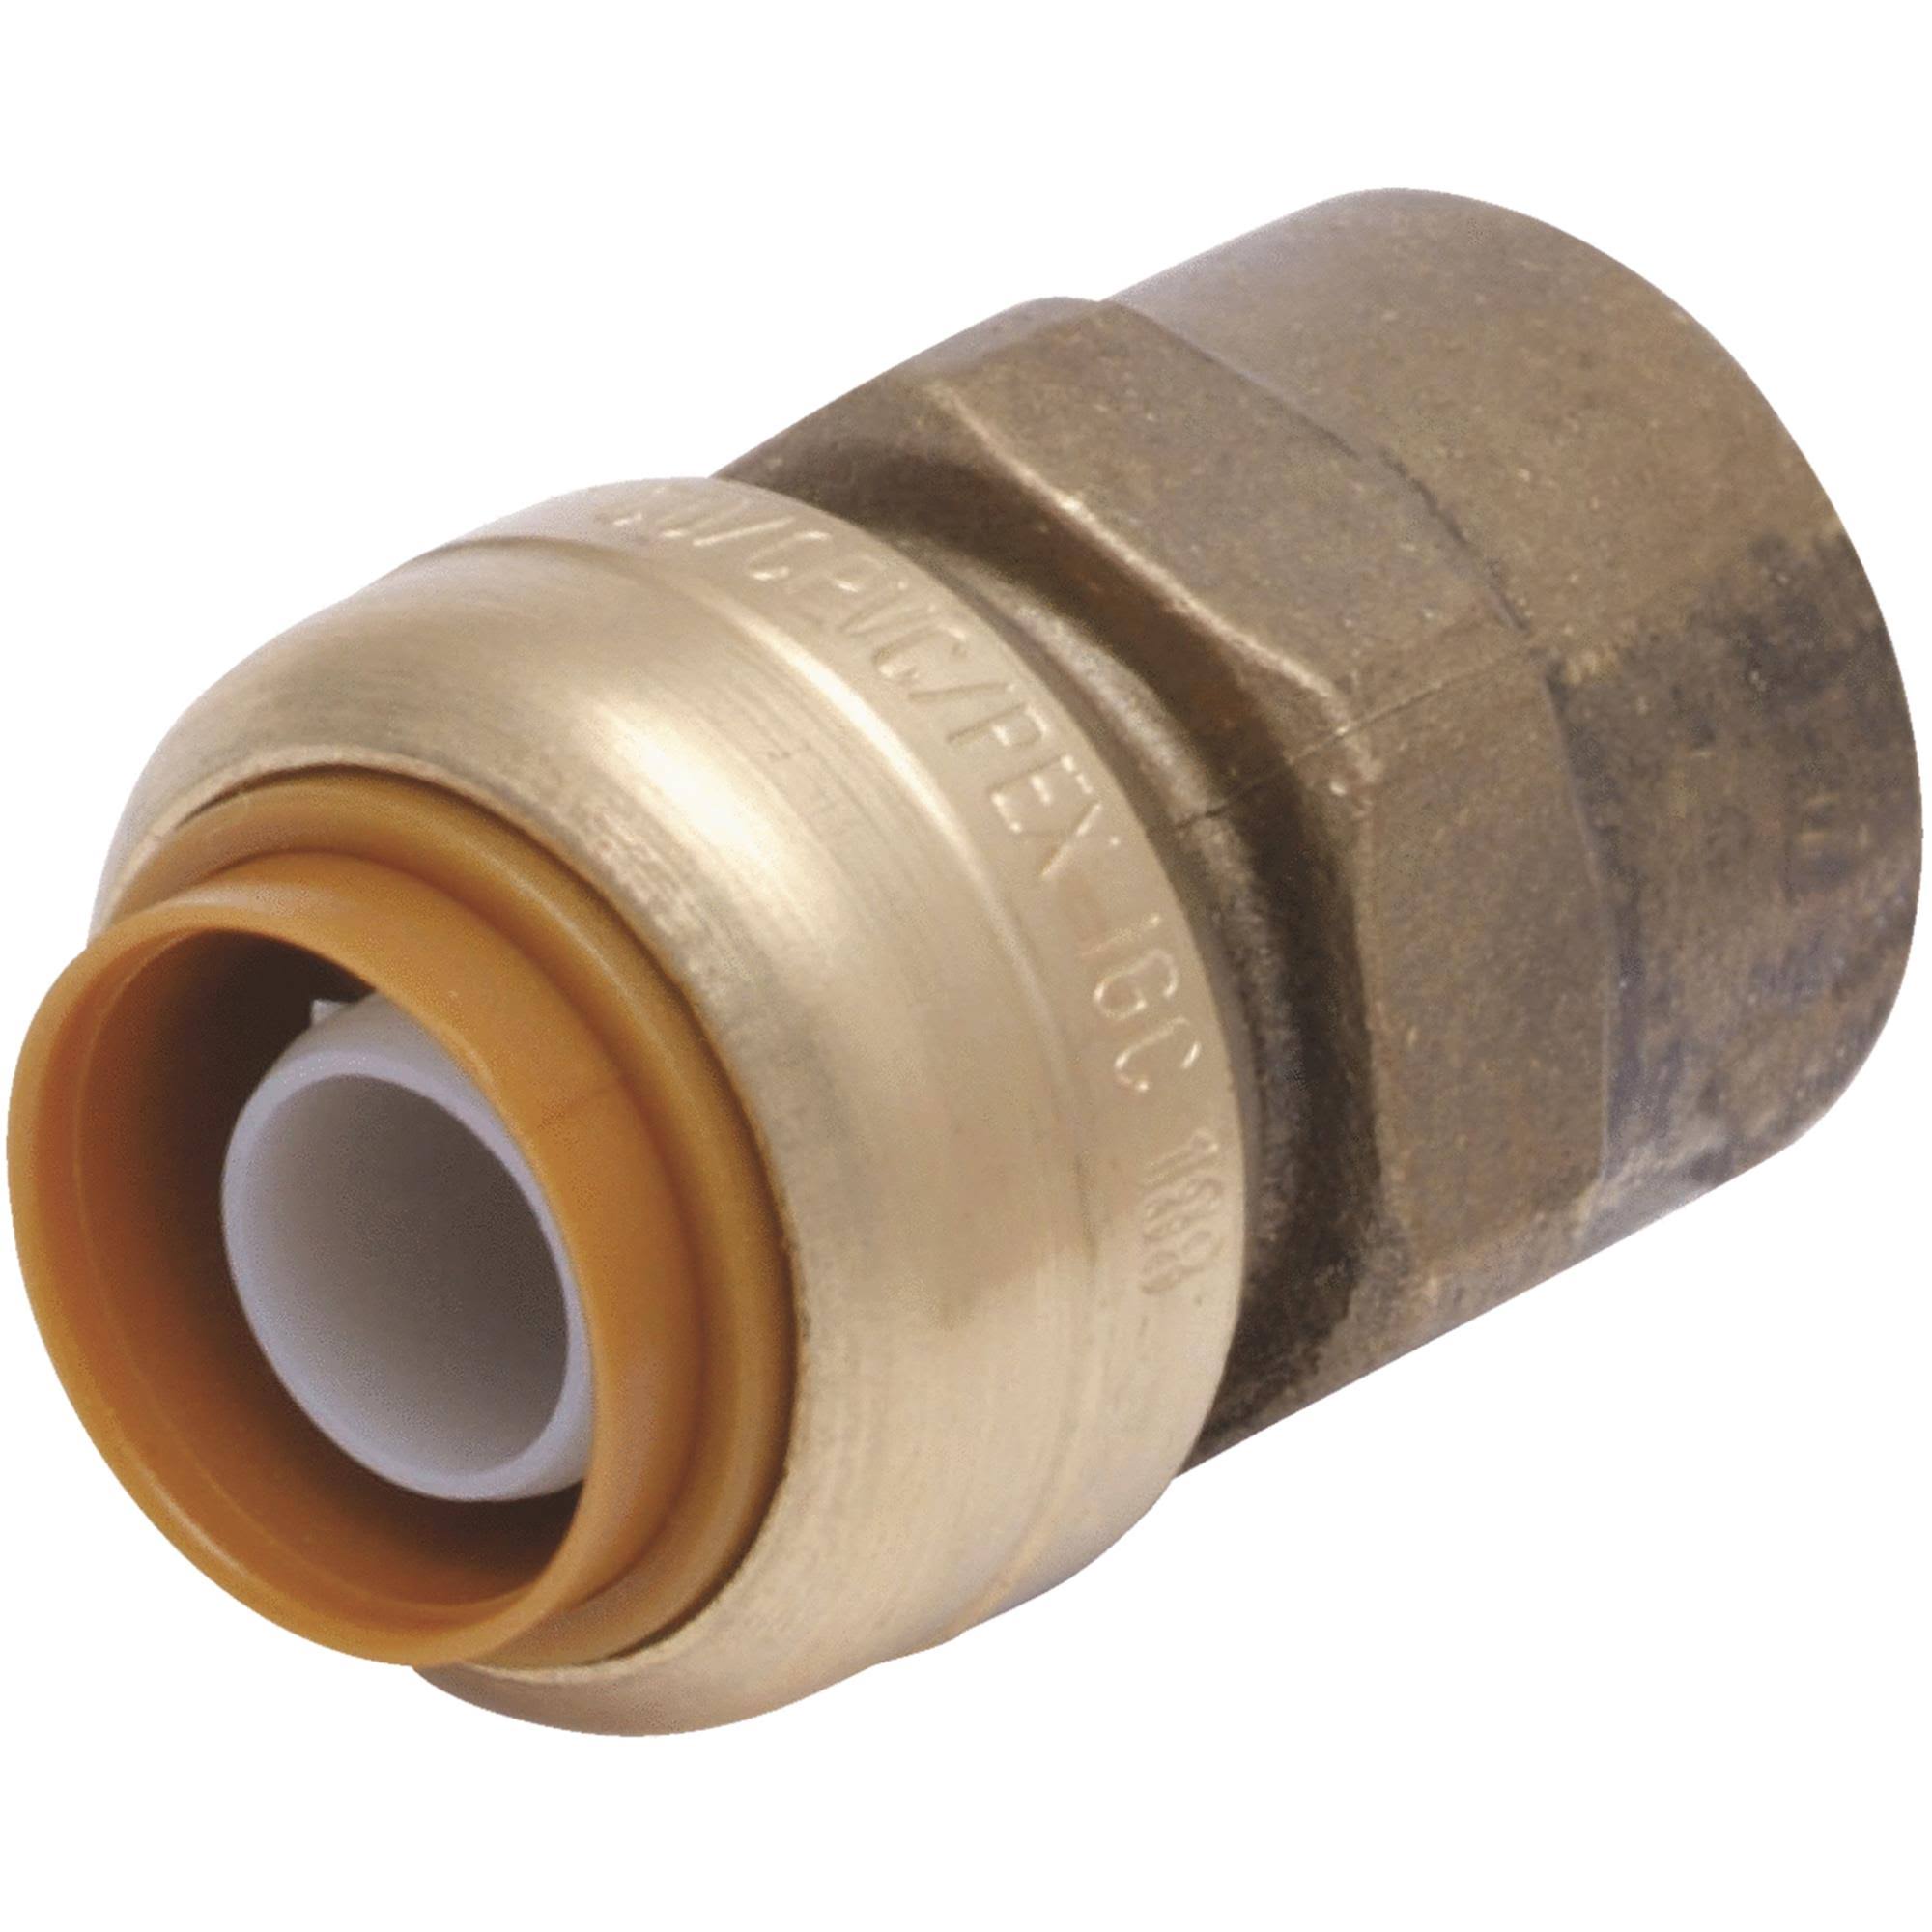 Cash Acme Sharkbite Push-To-Connect x Female Pipe Thread - Brass, 1/2"